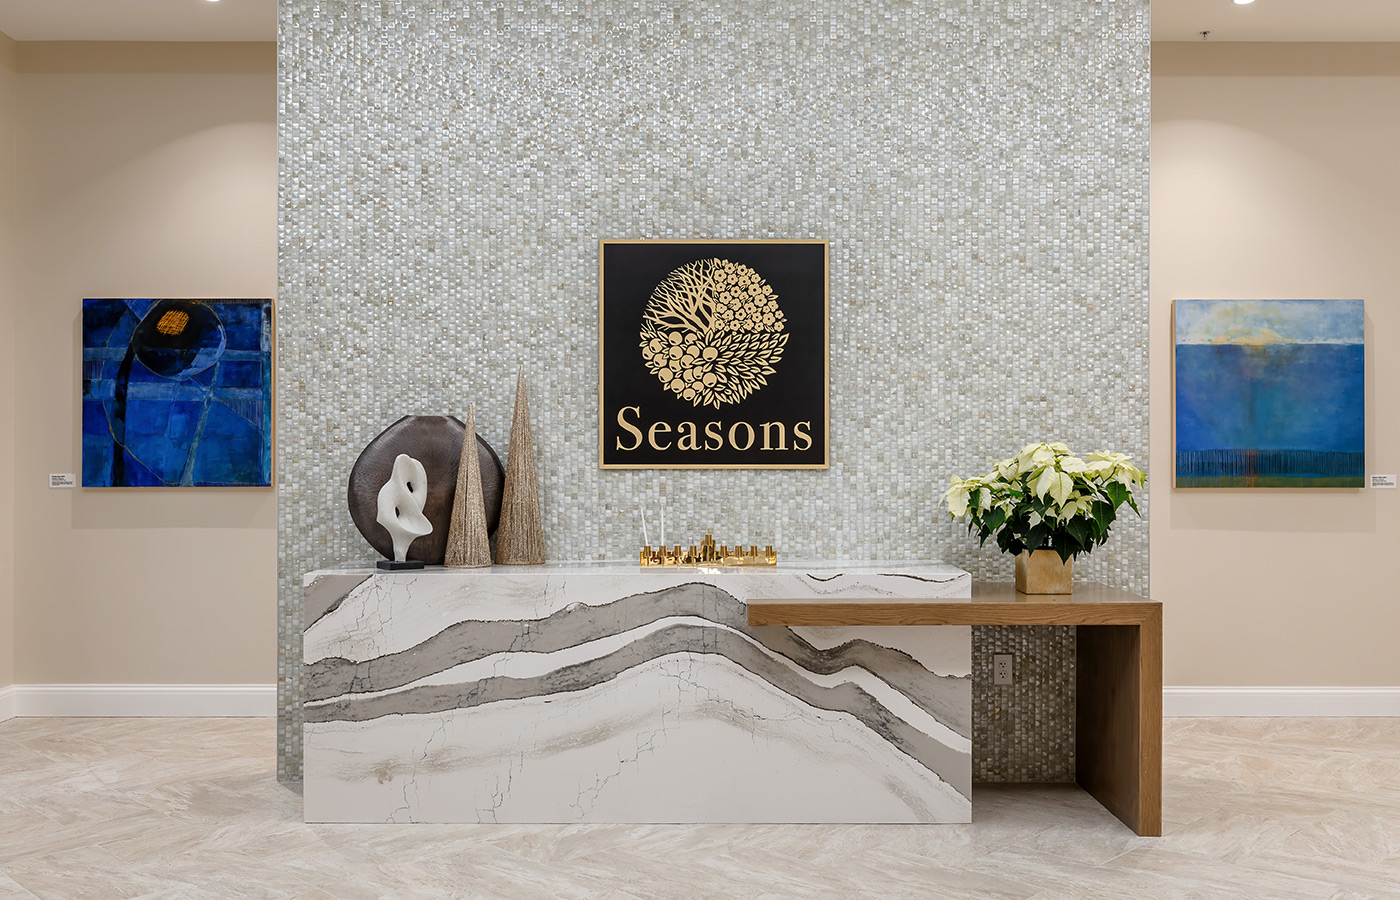 A sign for Seasons with modern decor.